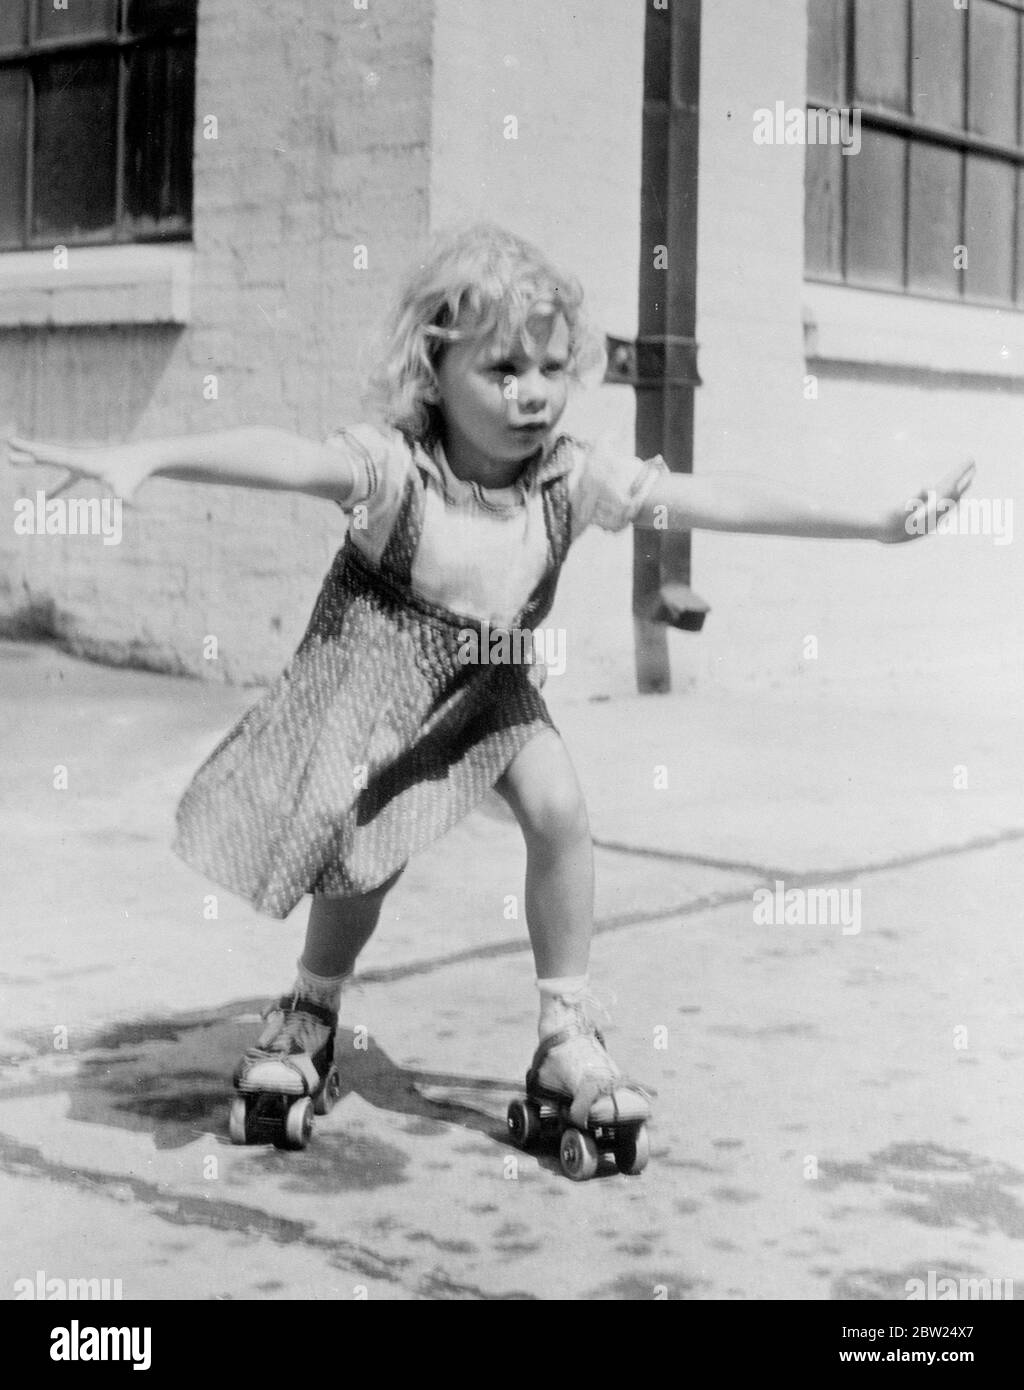 First 'steps' on skates by new child film actress. Many people have painful memories of their first acquaintances with roller skates. Perhaps they never realised how amusing their earliest efforts appeared to bystanders!. These pictures were made when little Janet Chapman, new six-year-old film actress, now appearing in Warner Brothers 'Three Girls on Broadway' in Hollywood, went through the same exciting ordeal. The skates were given to her by John Farrow, the film director. Janet's sturdy little legs did the rest!. Photo shows, Janet makes an optimistic start. Stock Photo